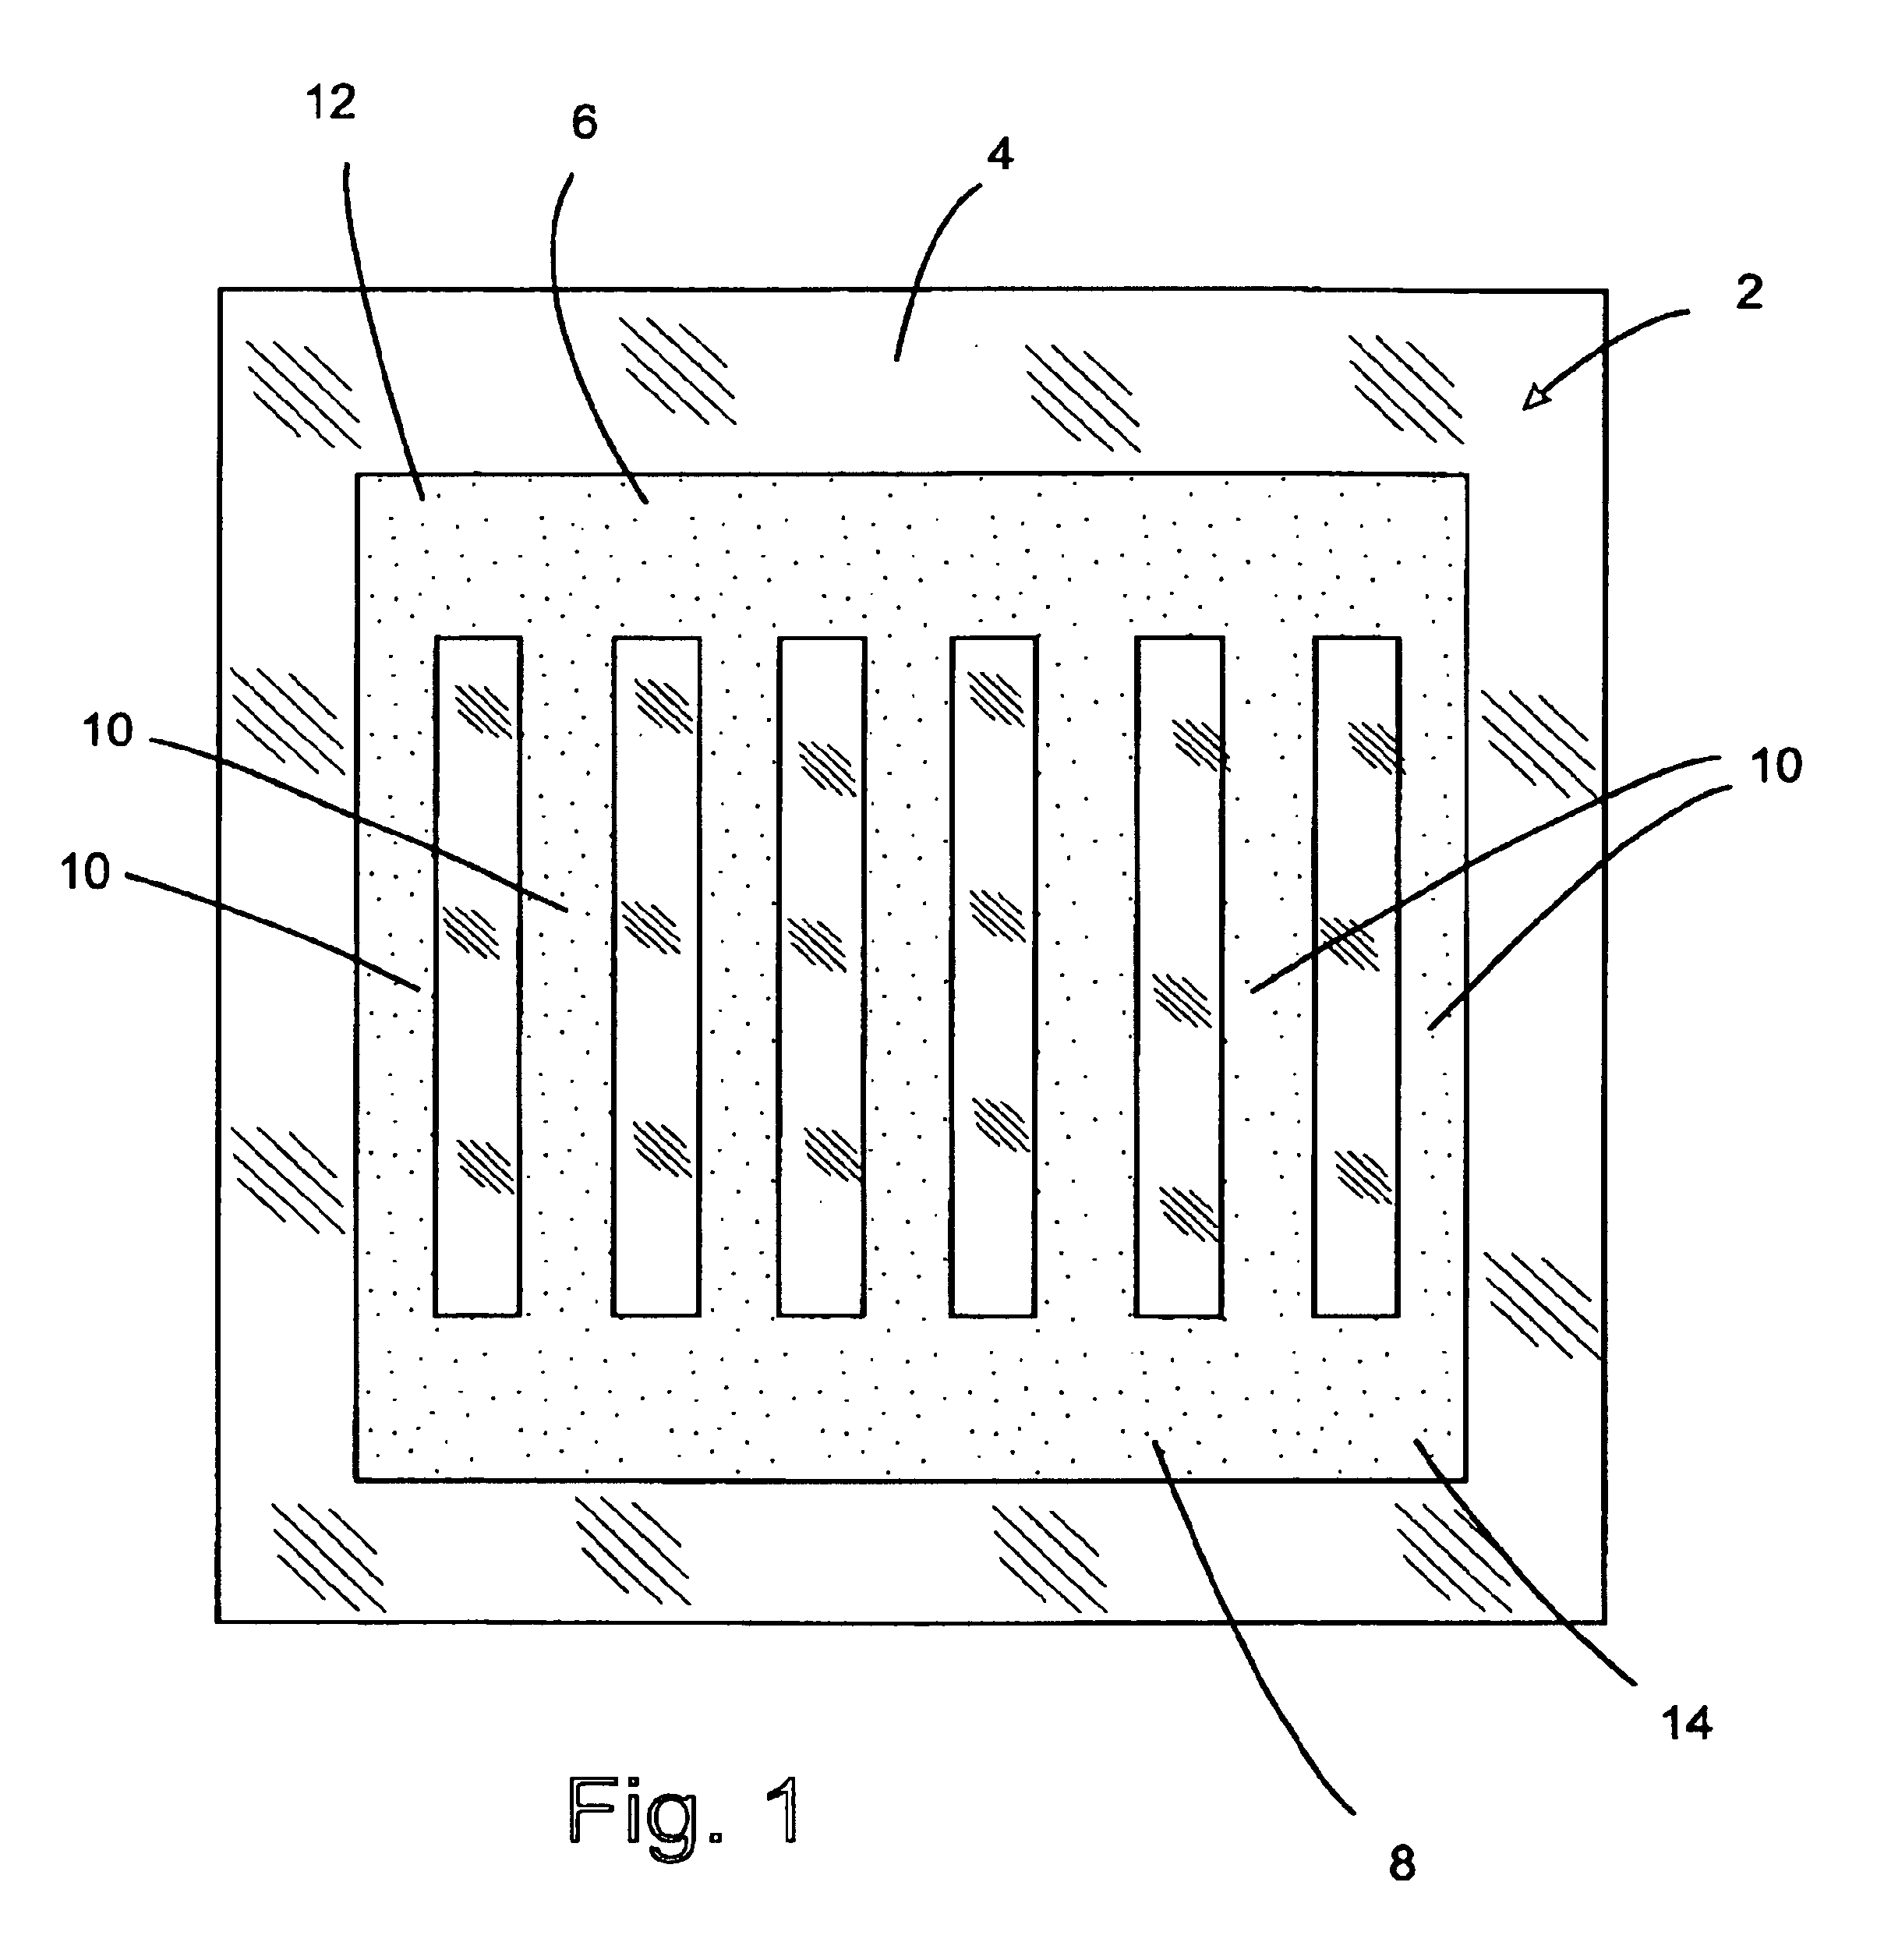 Heating elements deposited on a substrate and related method